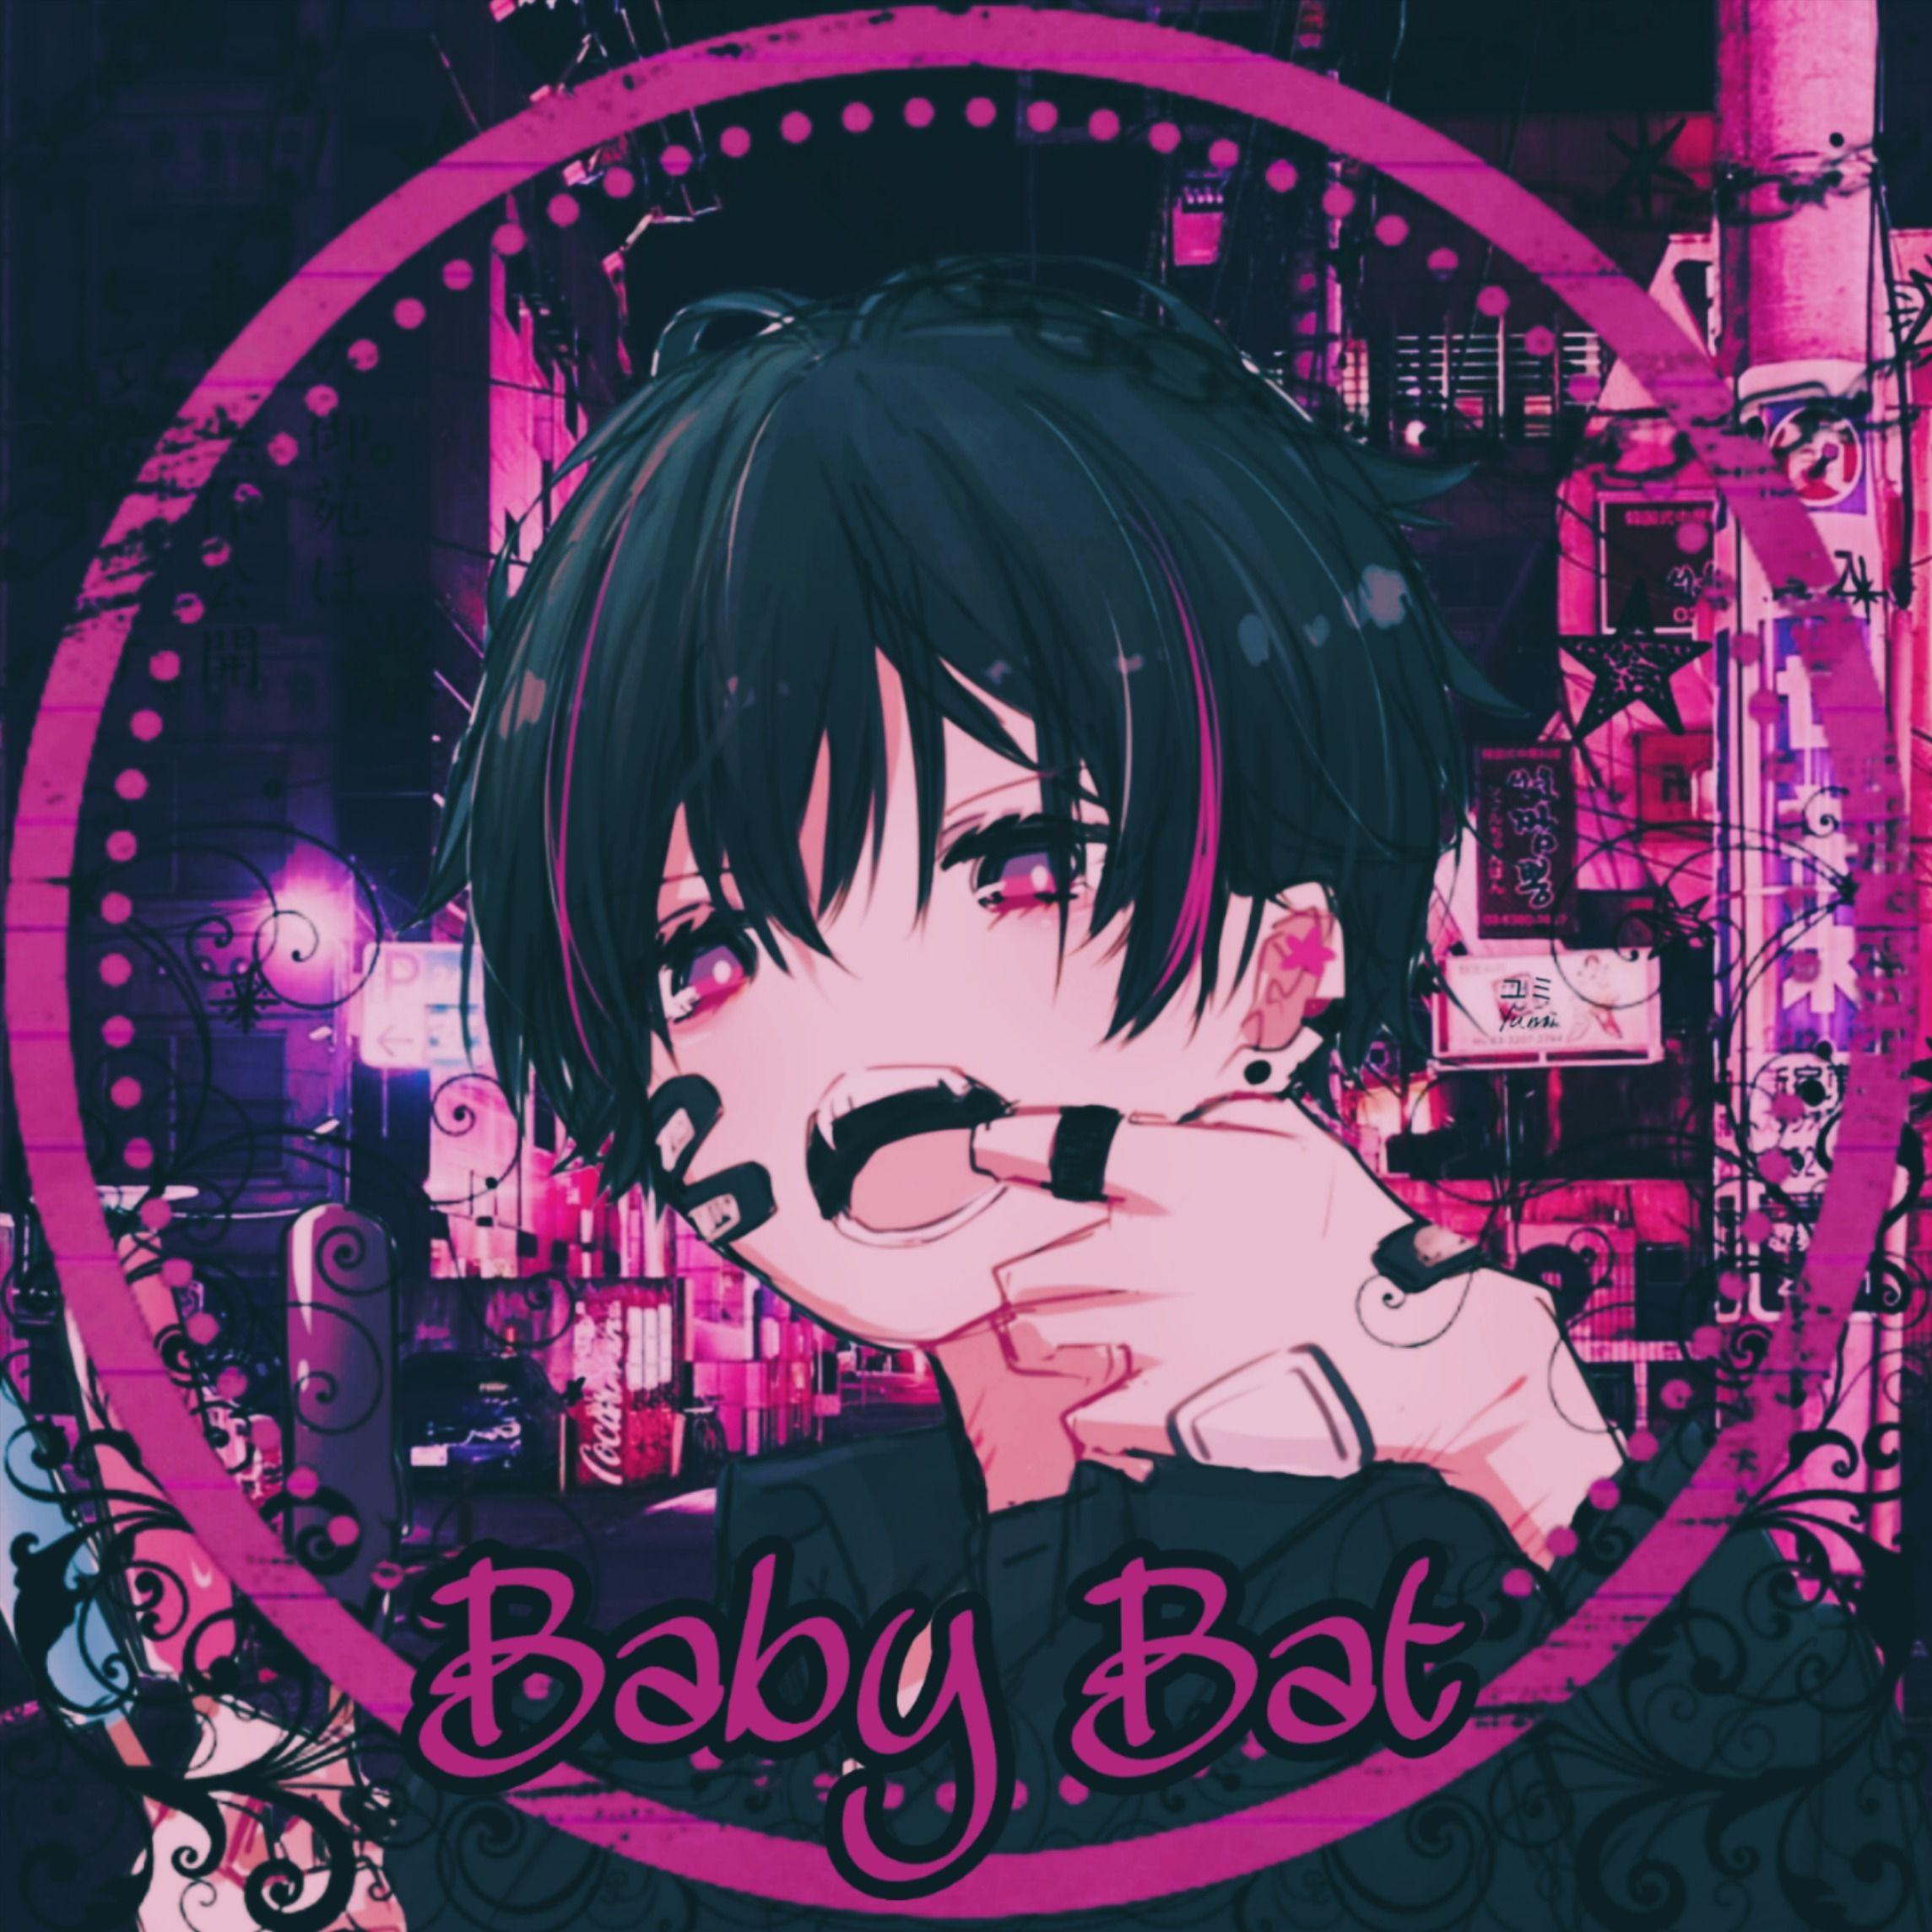 Download Free Boy Anime Aesthetic Download HQ ICON favicon